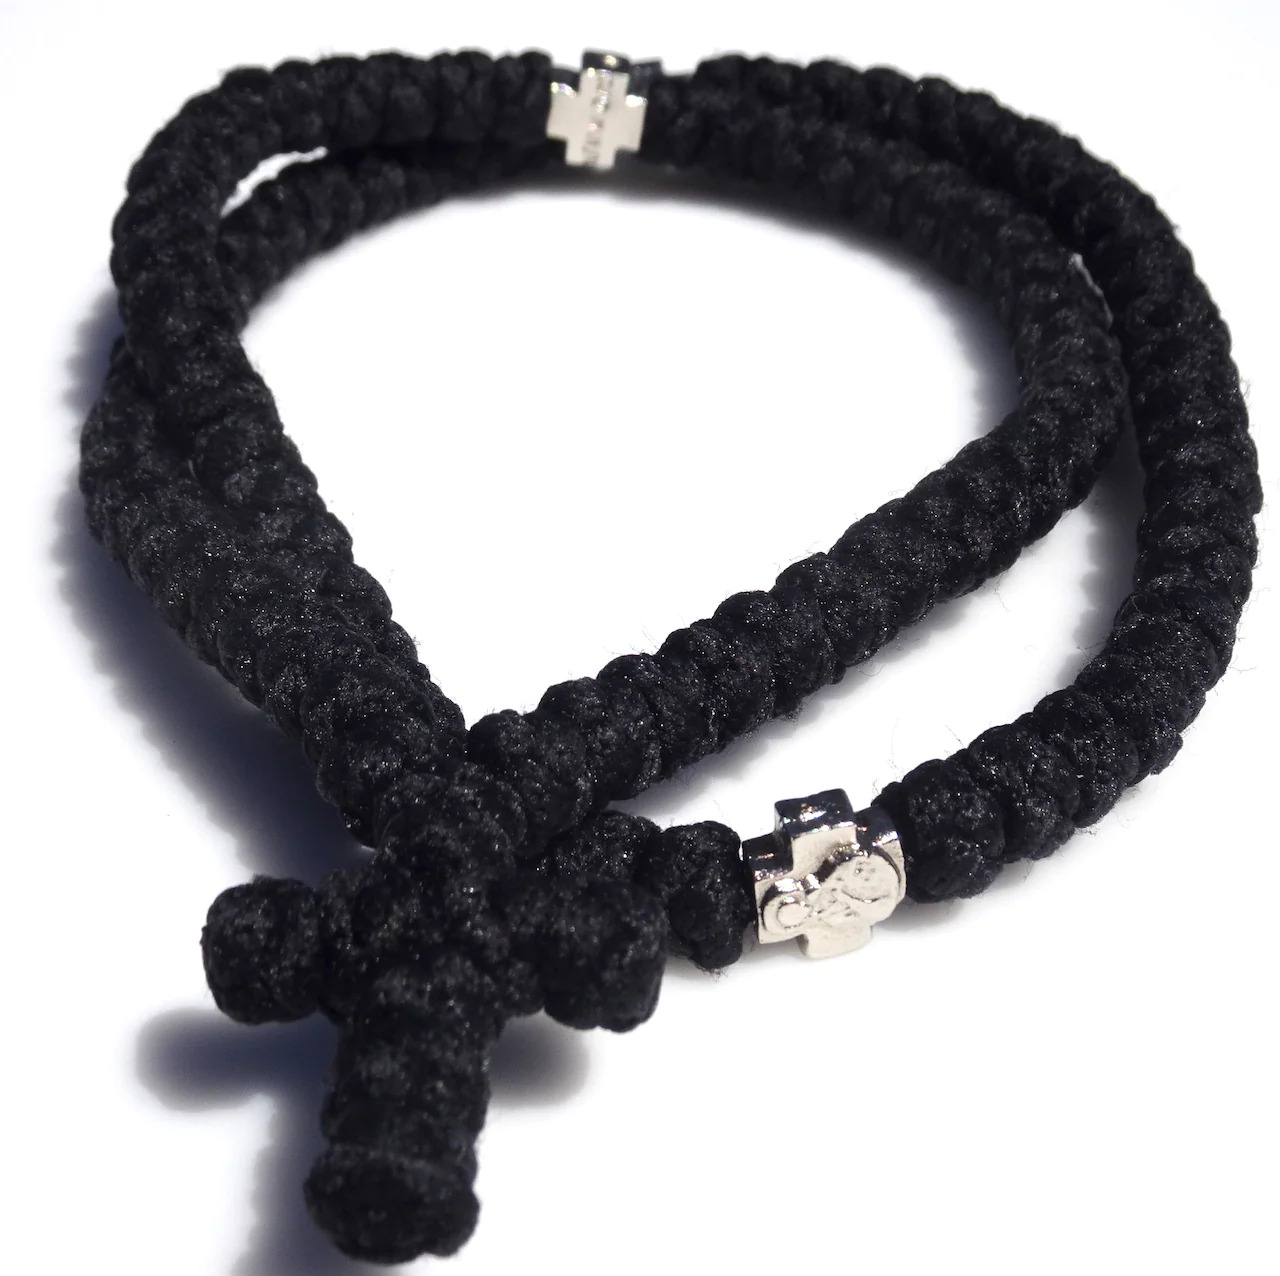 100 Knots Extra Long Orthodox Prayer Rope with Knotted Cross